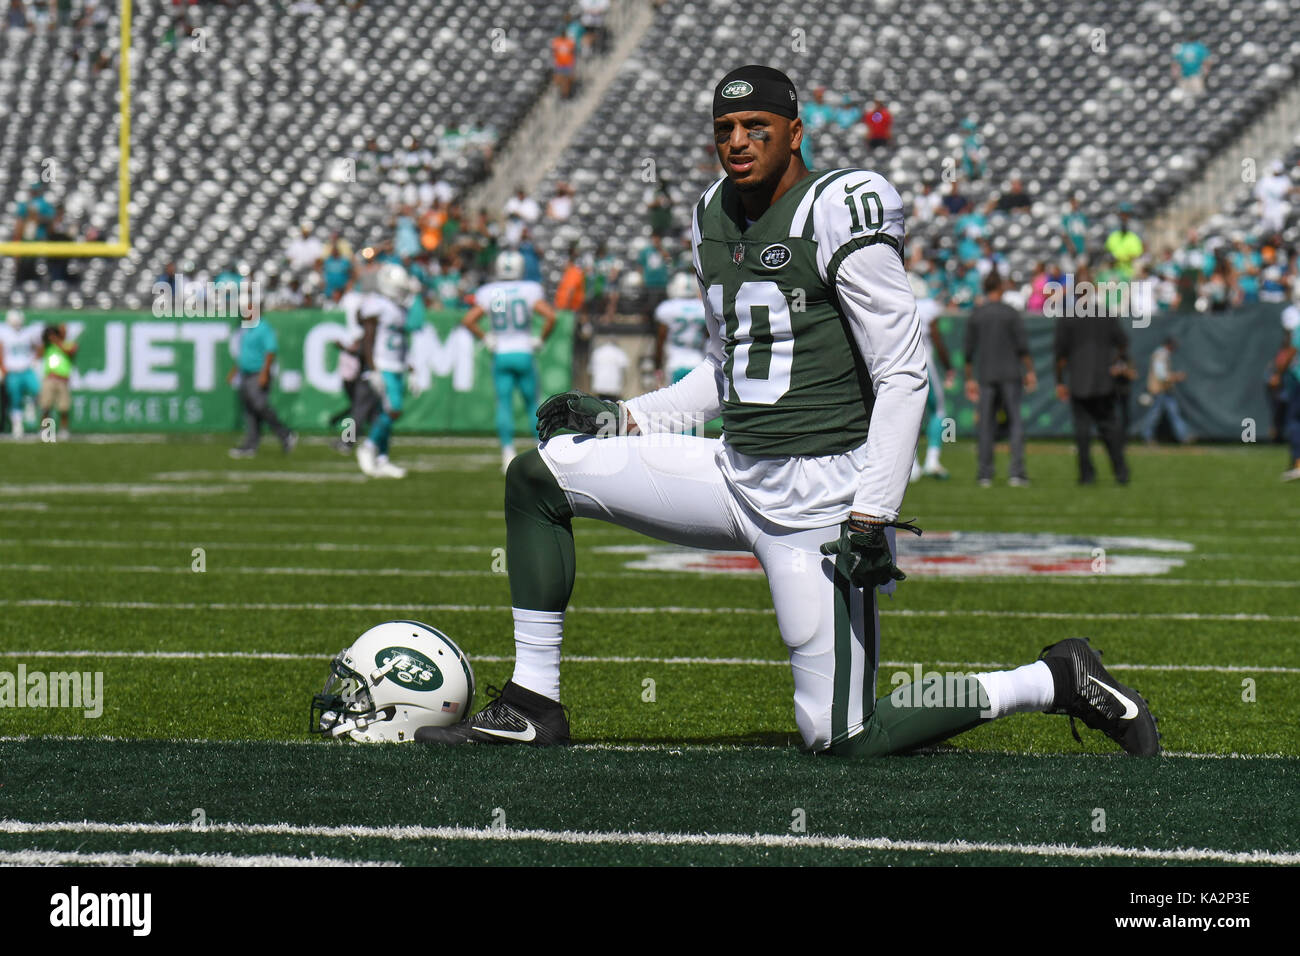 East Rutherford, New Jersey, USA. 24th Sep, 2017. Jermaine Kearse (10) of the New York Jets stretches prior to a game against the Miami Dolphins at Metlife Stadium in East Rutherford, New Jersey. Gregory Vasil/Cal Sport Media/Alamy Live News Stock Photo